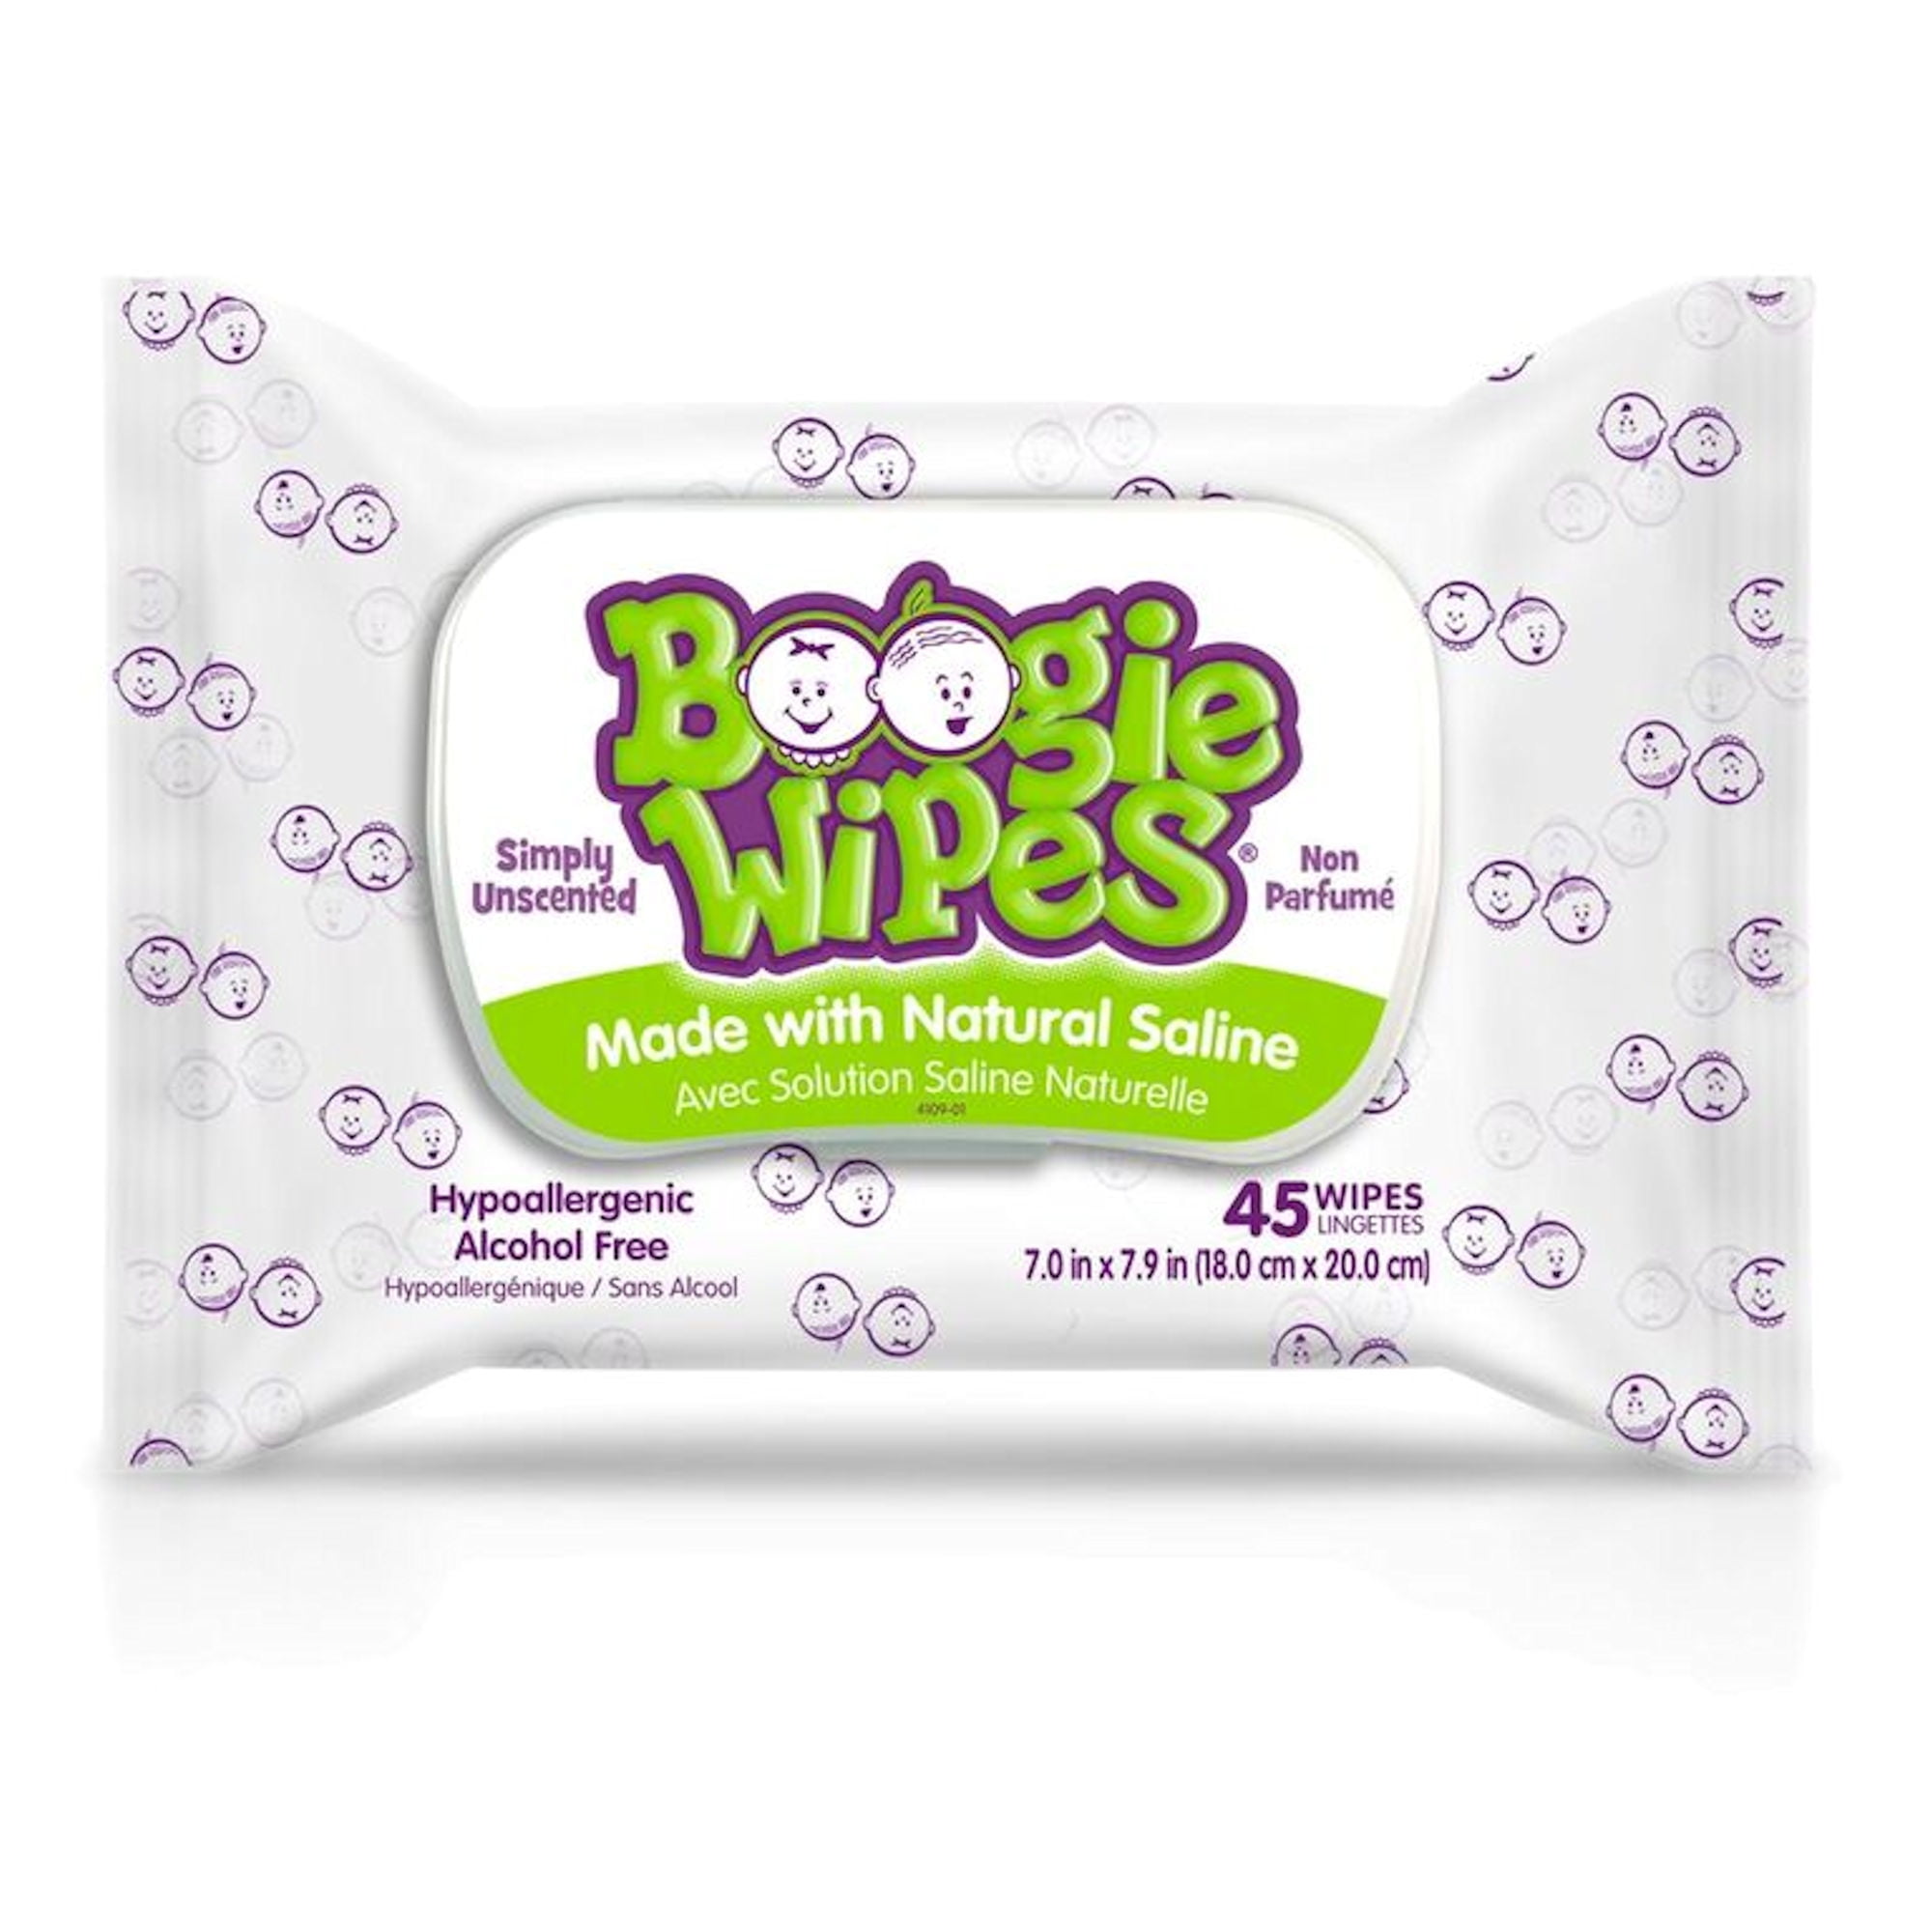 Boogie Wipes Saline Nose Wipes - 45ct